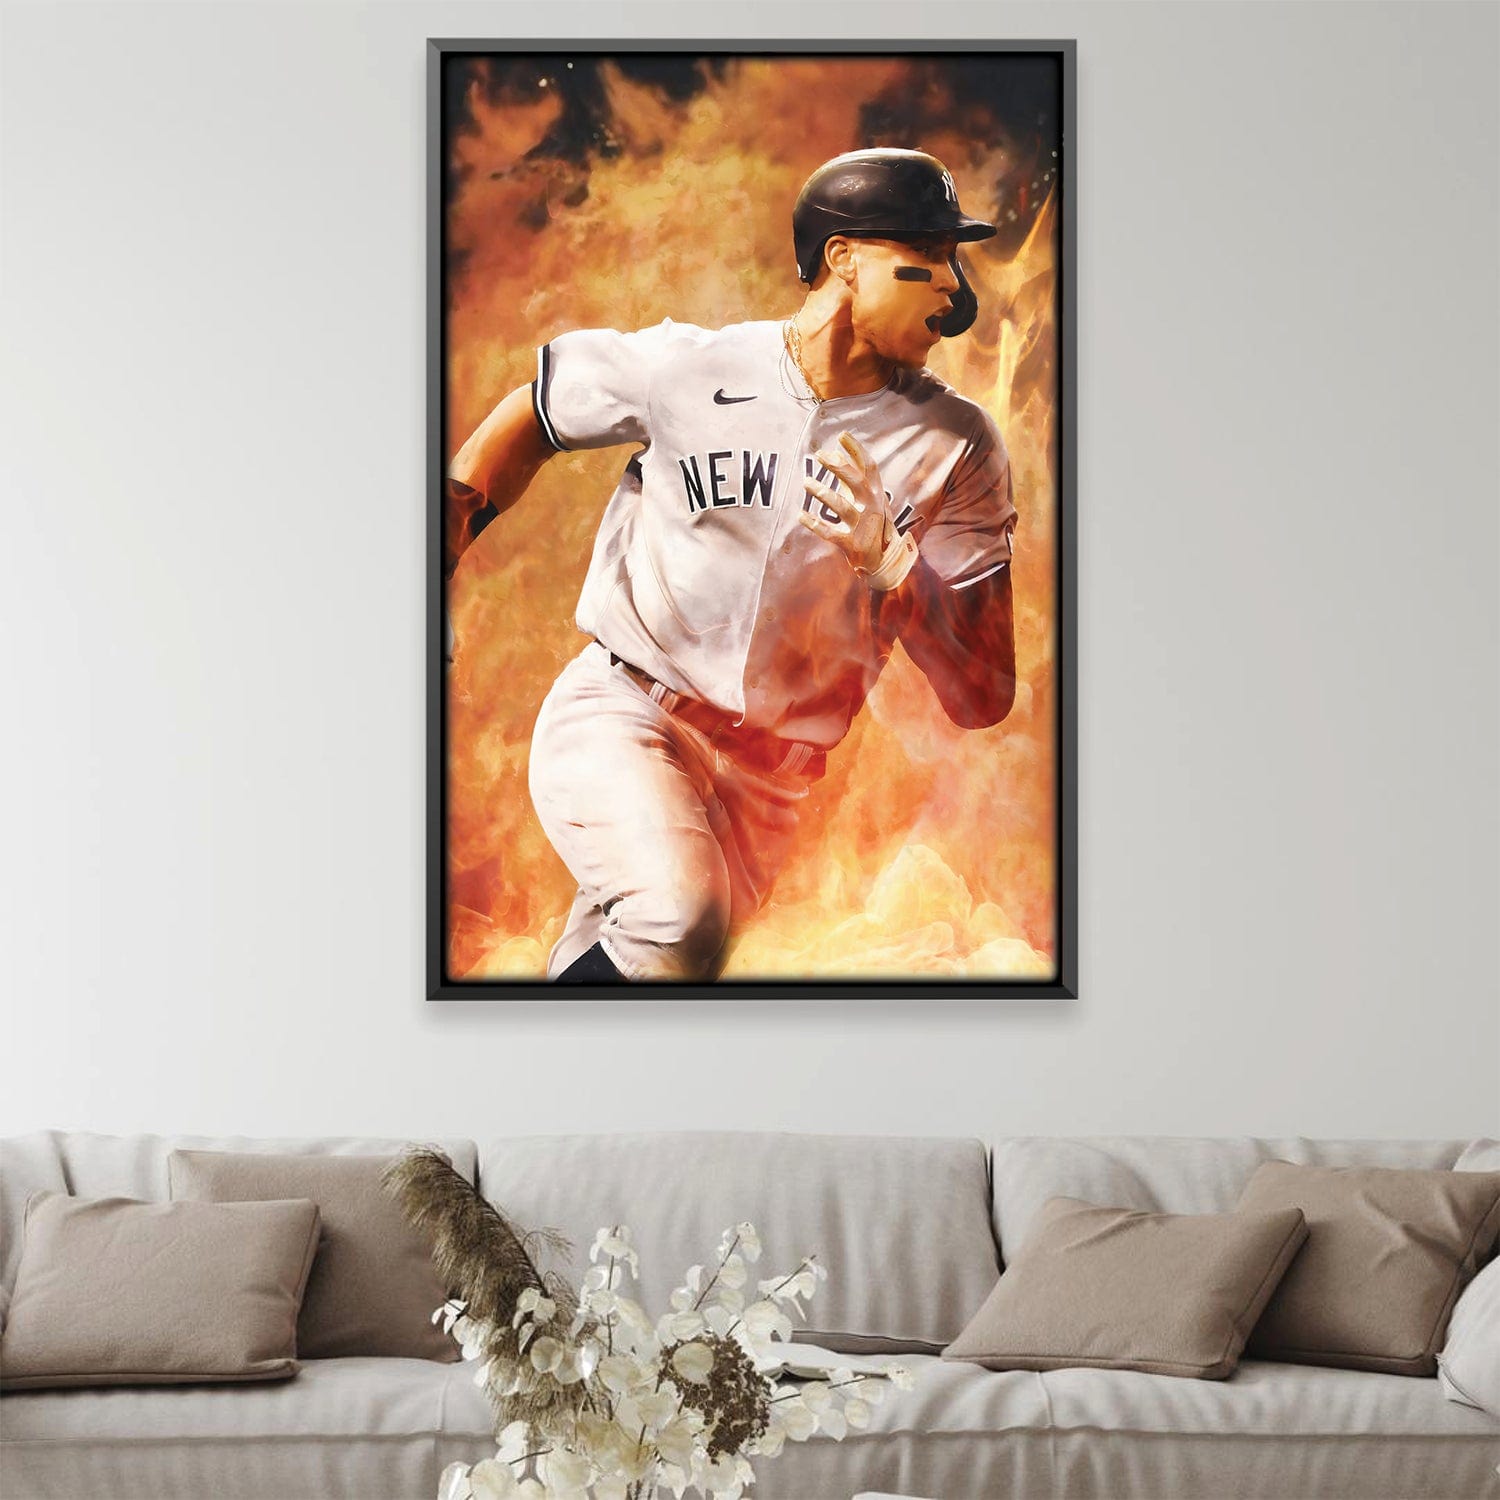  Great Images New York Yankees Logo 24x36 inch rolled